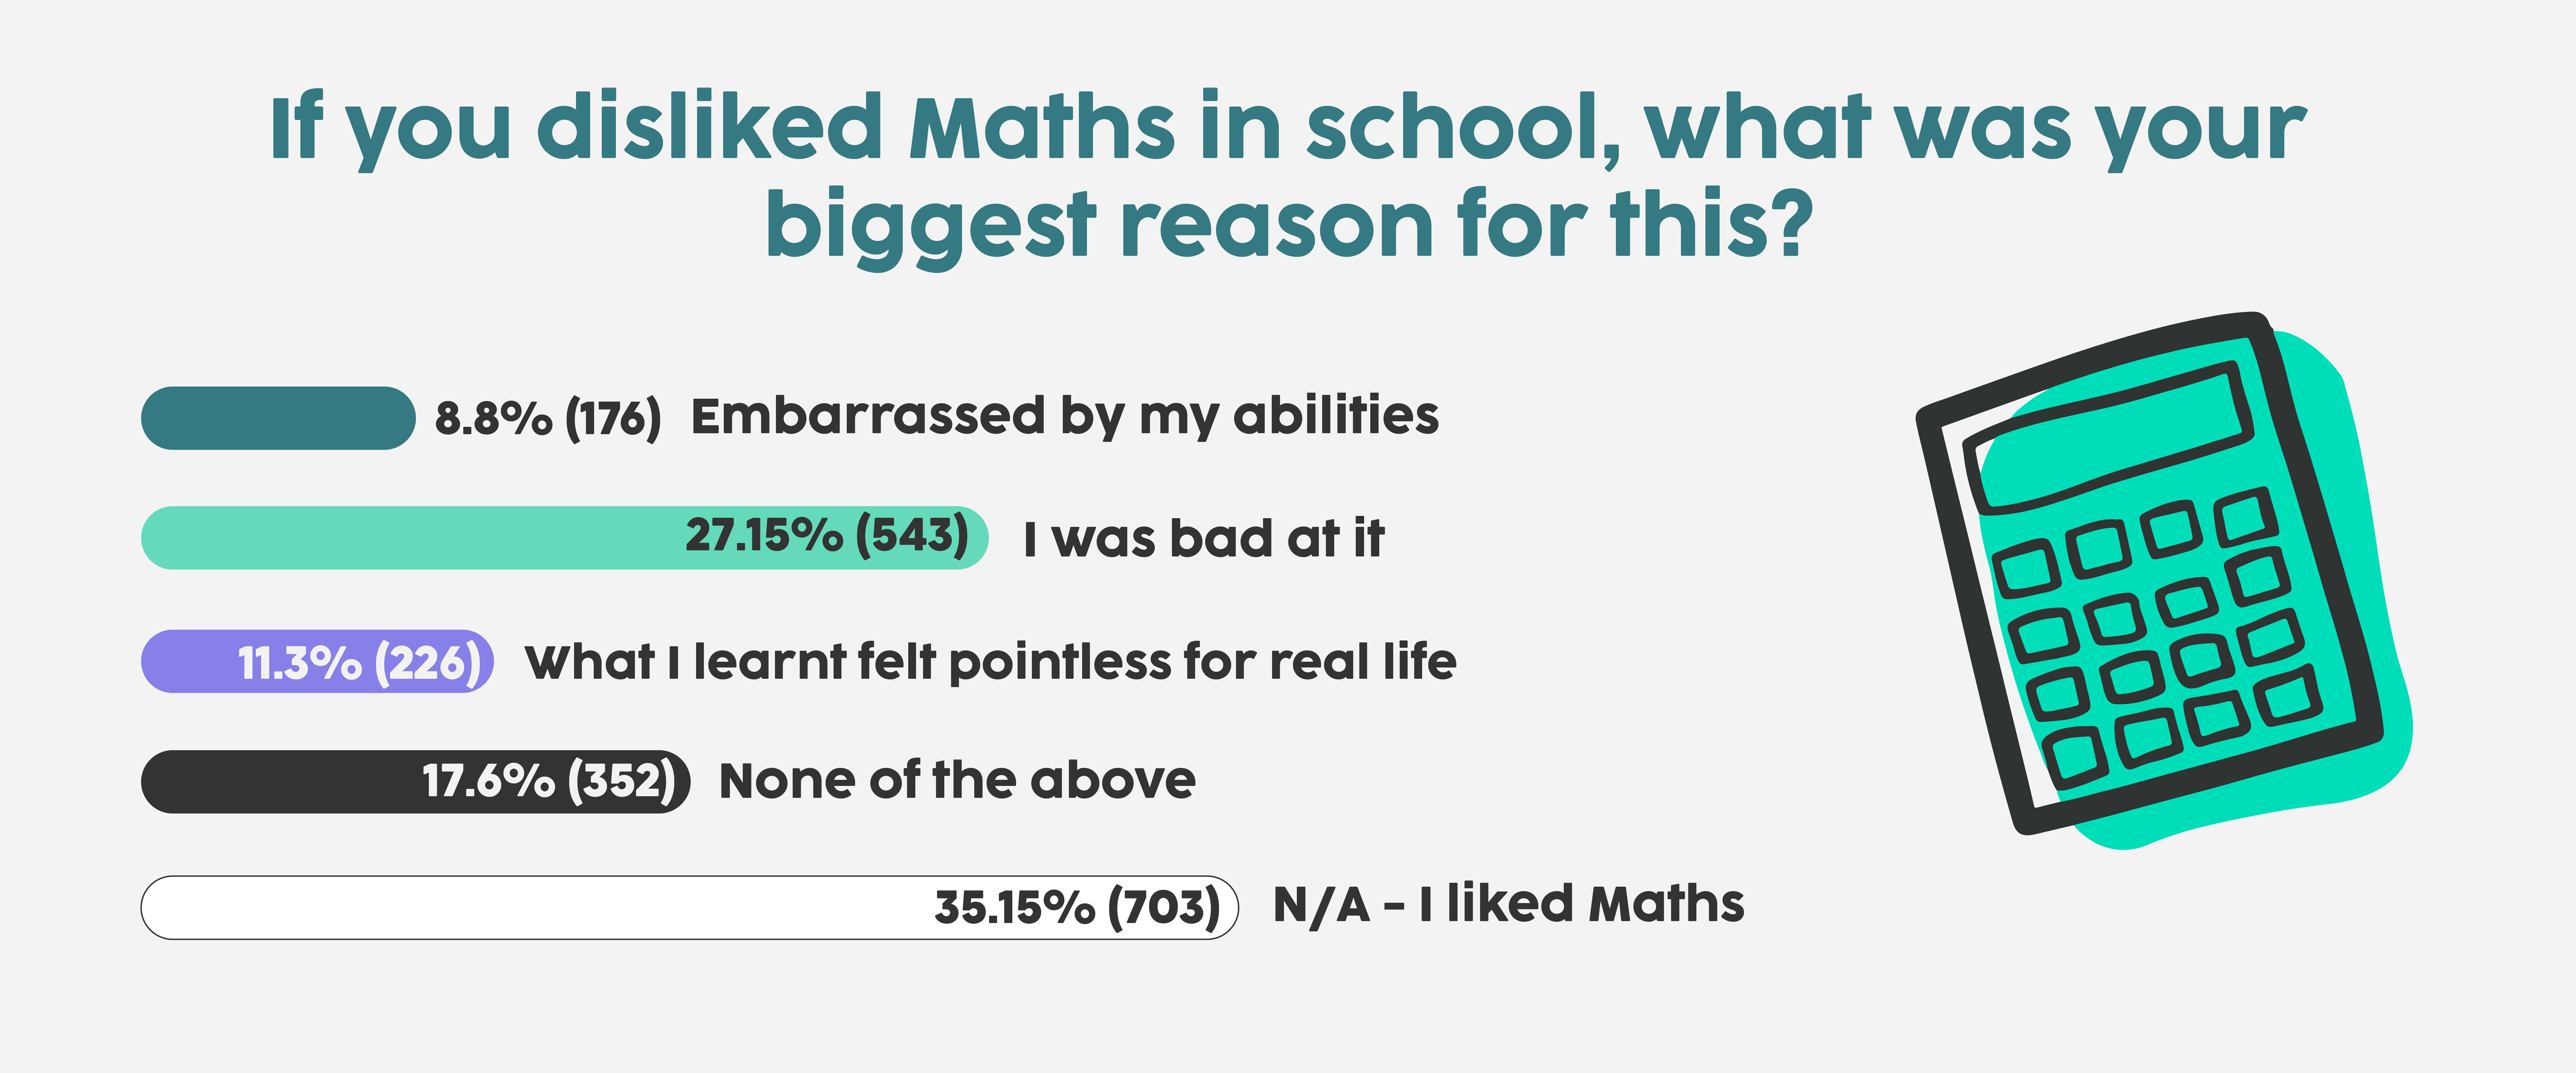 8.8% of adults disliked maths in school because they were embarrassed by their abilities